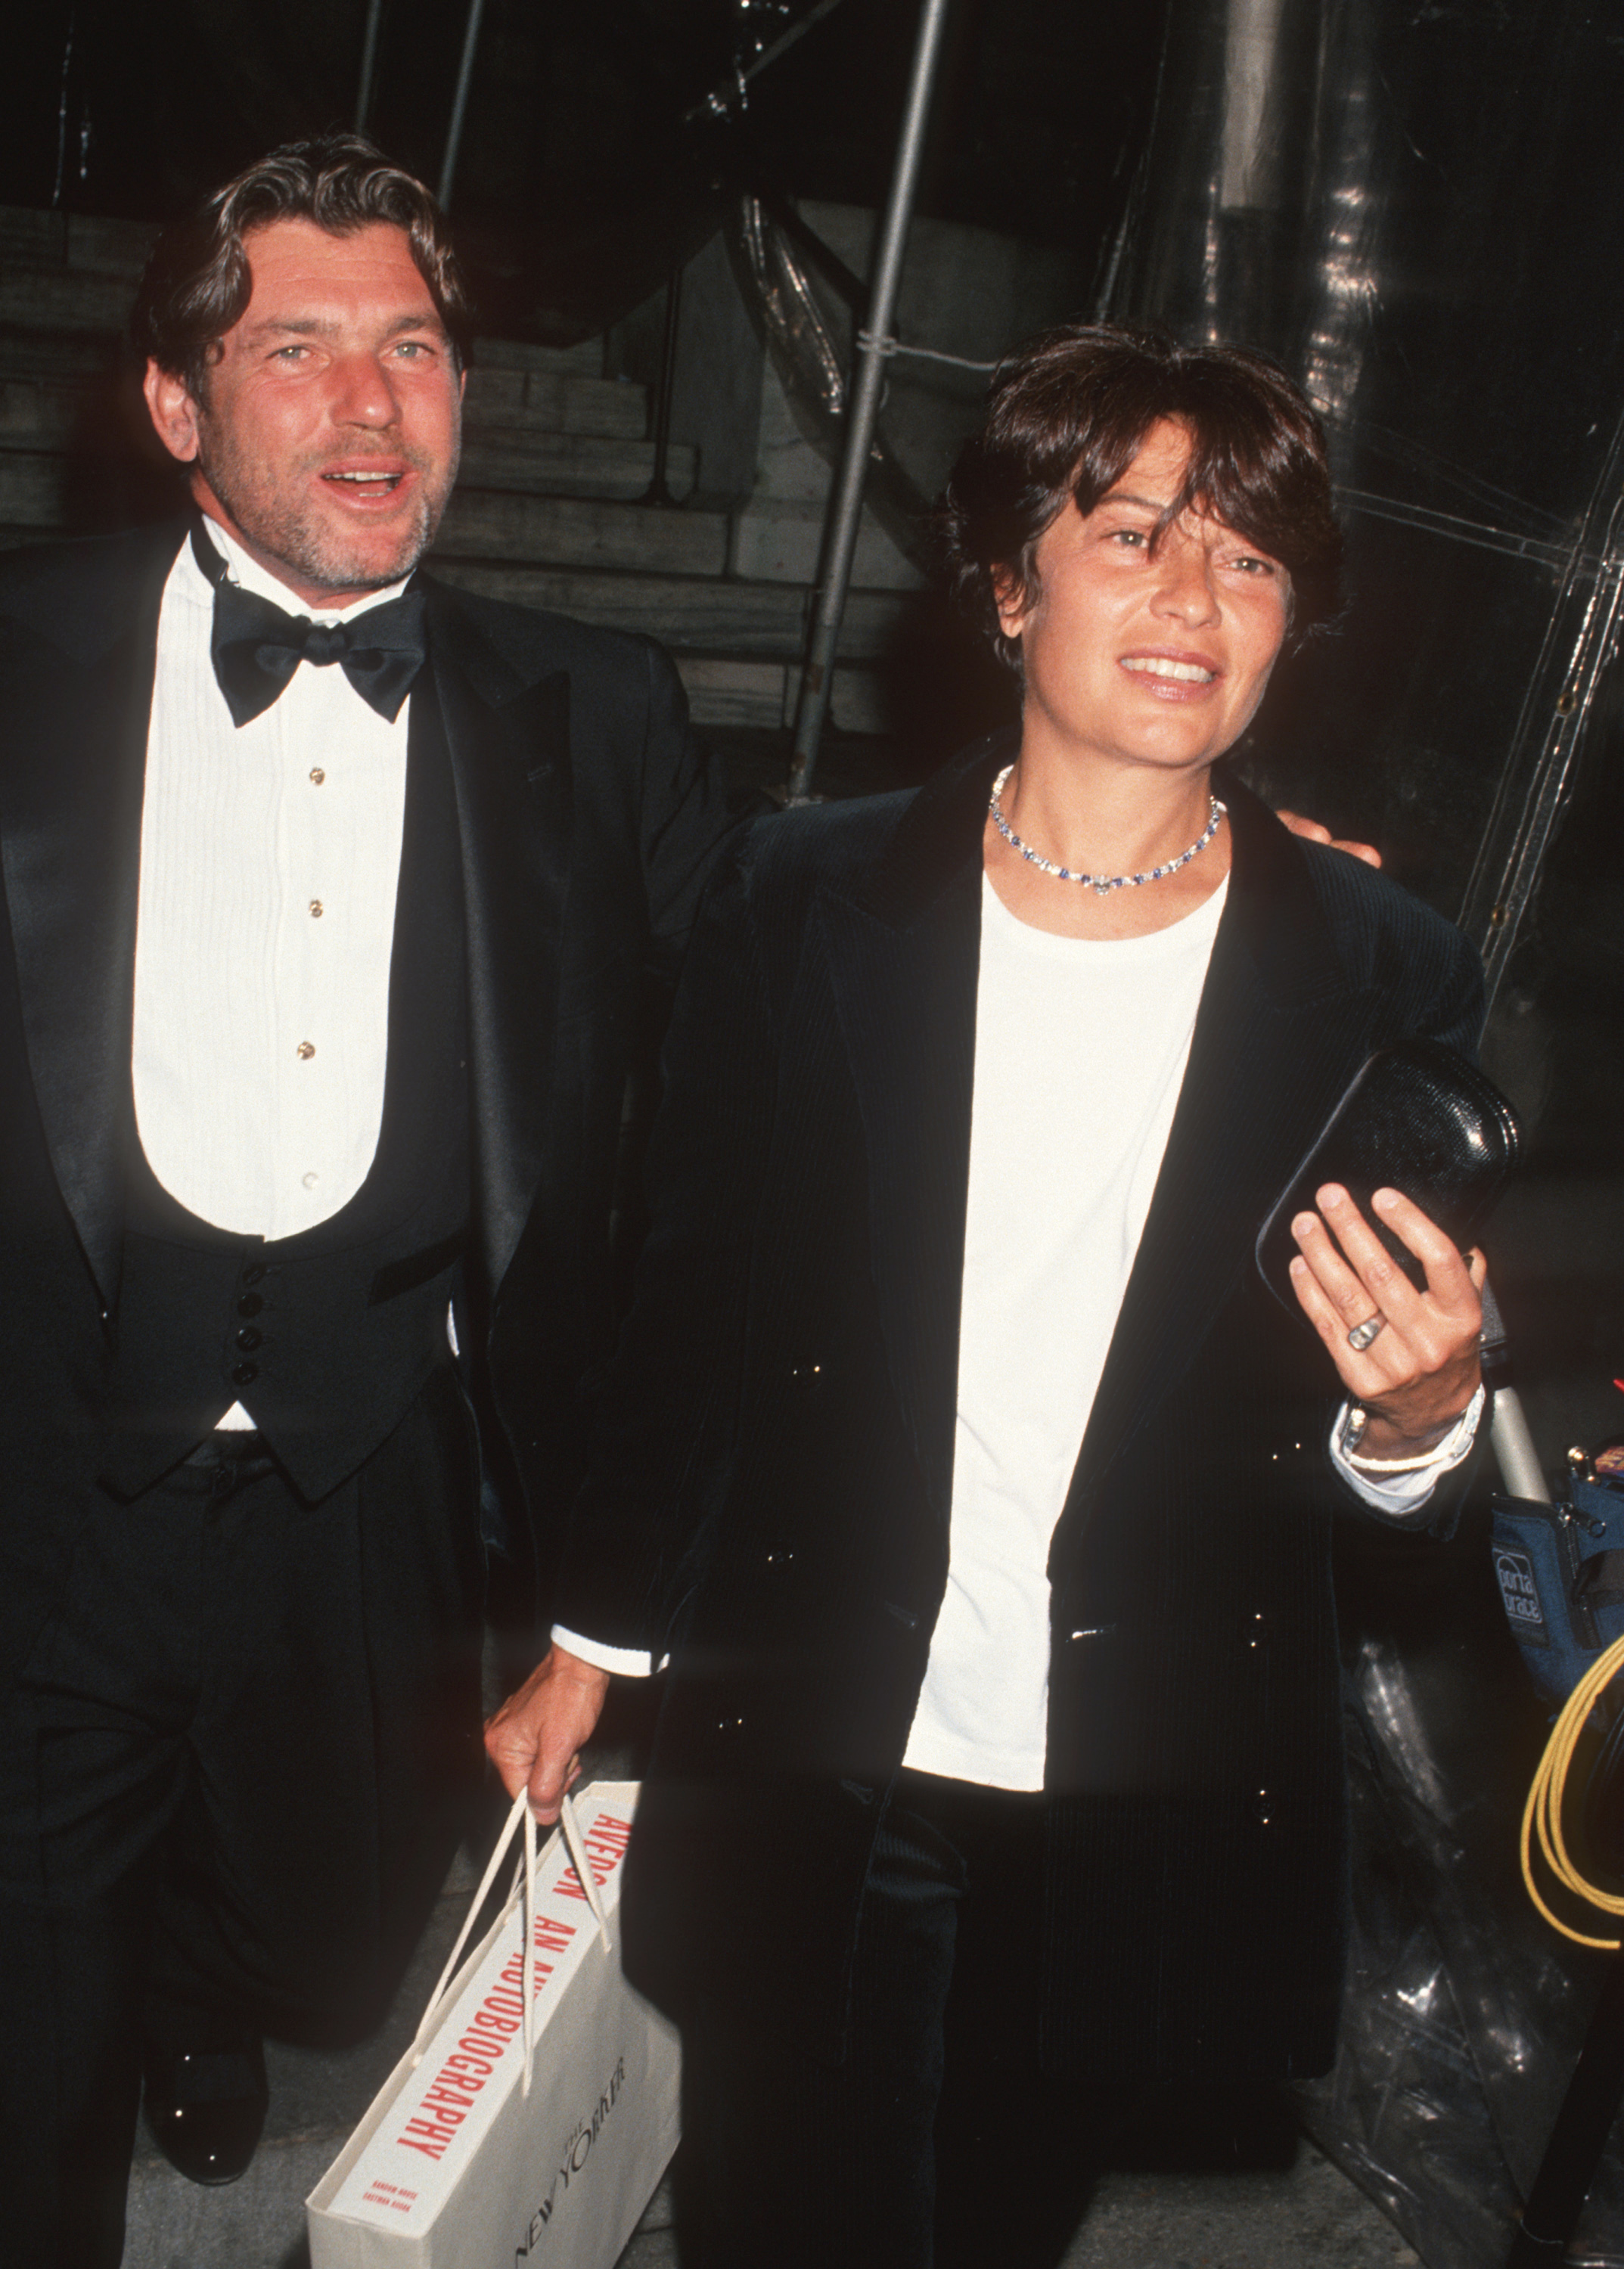 Jann Wenner and Jane Schindelheim at the Dinner Party Honoring Richard Avedon Hosted by Random House and The New Yorker on September 27, 1993, in New York City. | Source: Getty Images